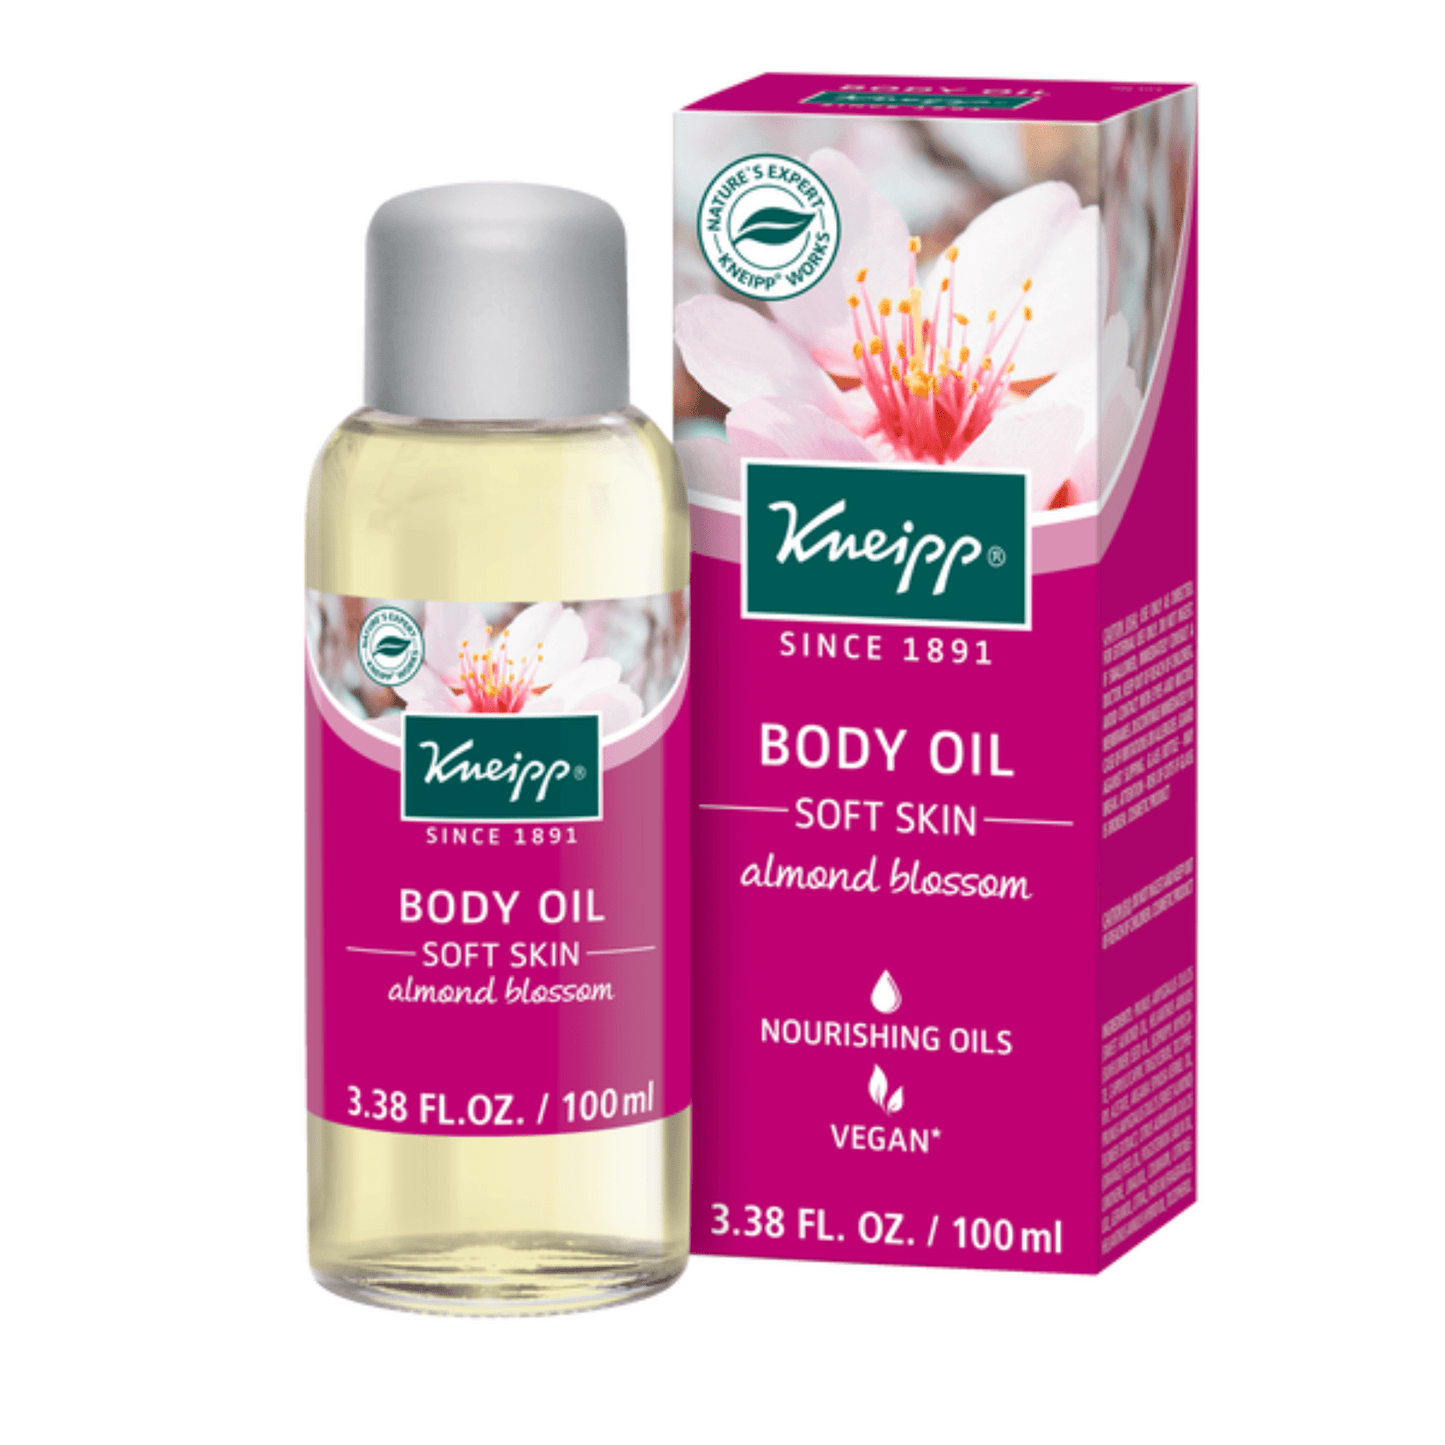 Primary Image of Almond Blossom Soft Skin Body Oil